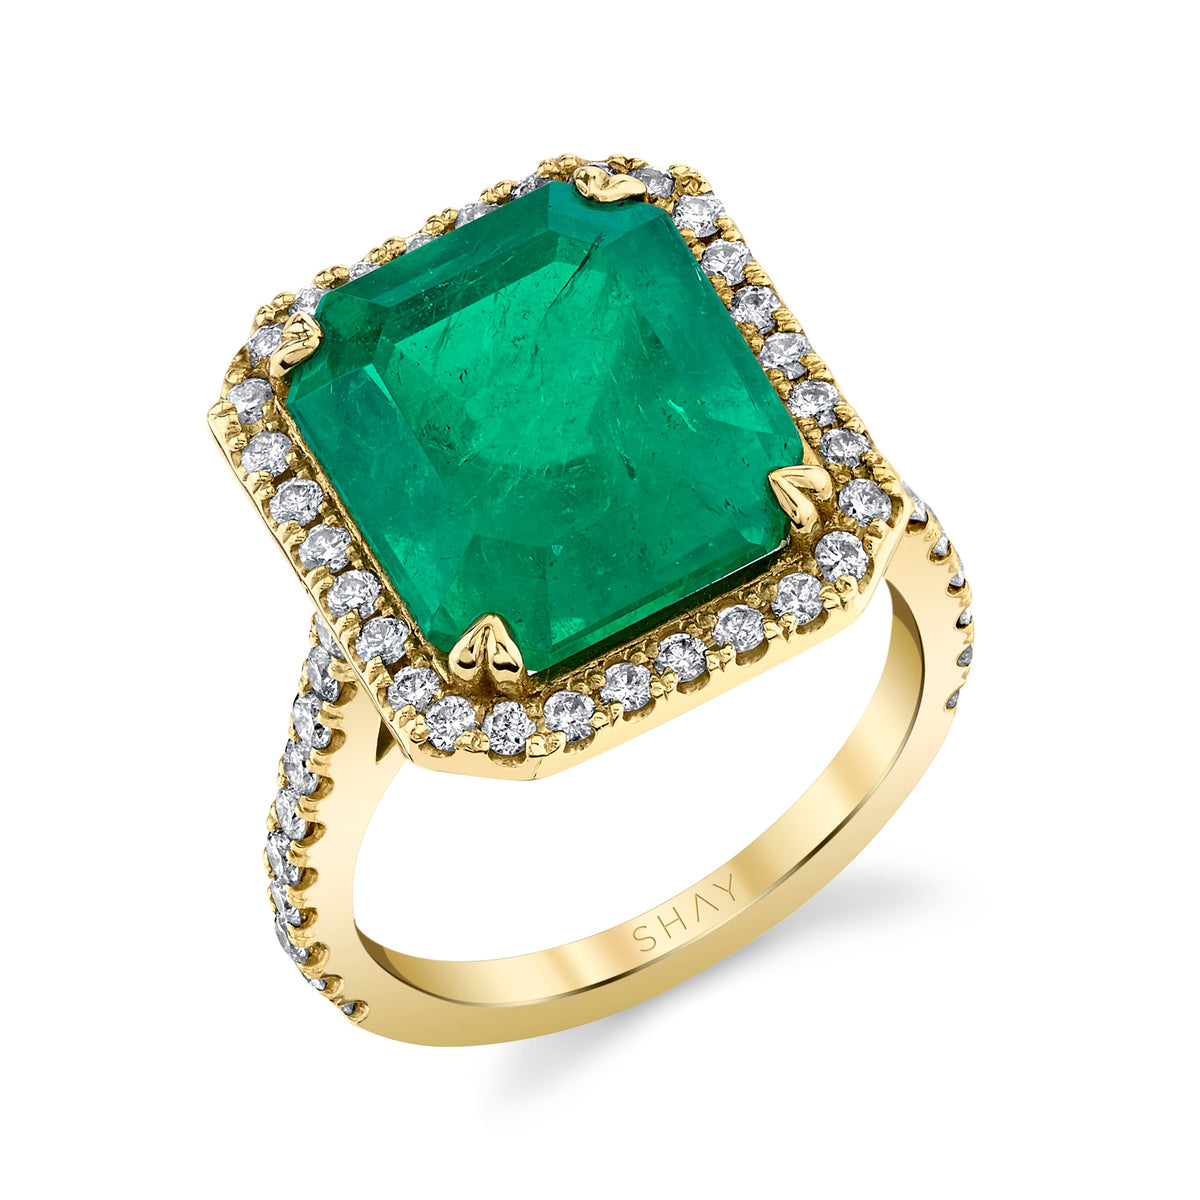 READY TO SHIP DIAMOND & EMERALD SOLITAIRE HALO RING